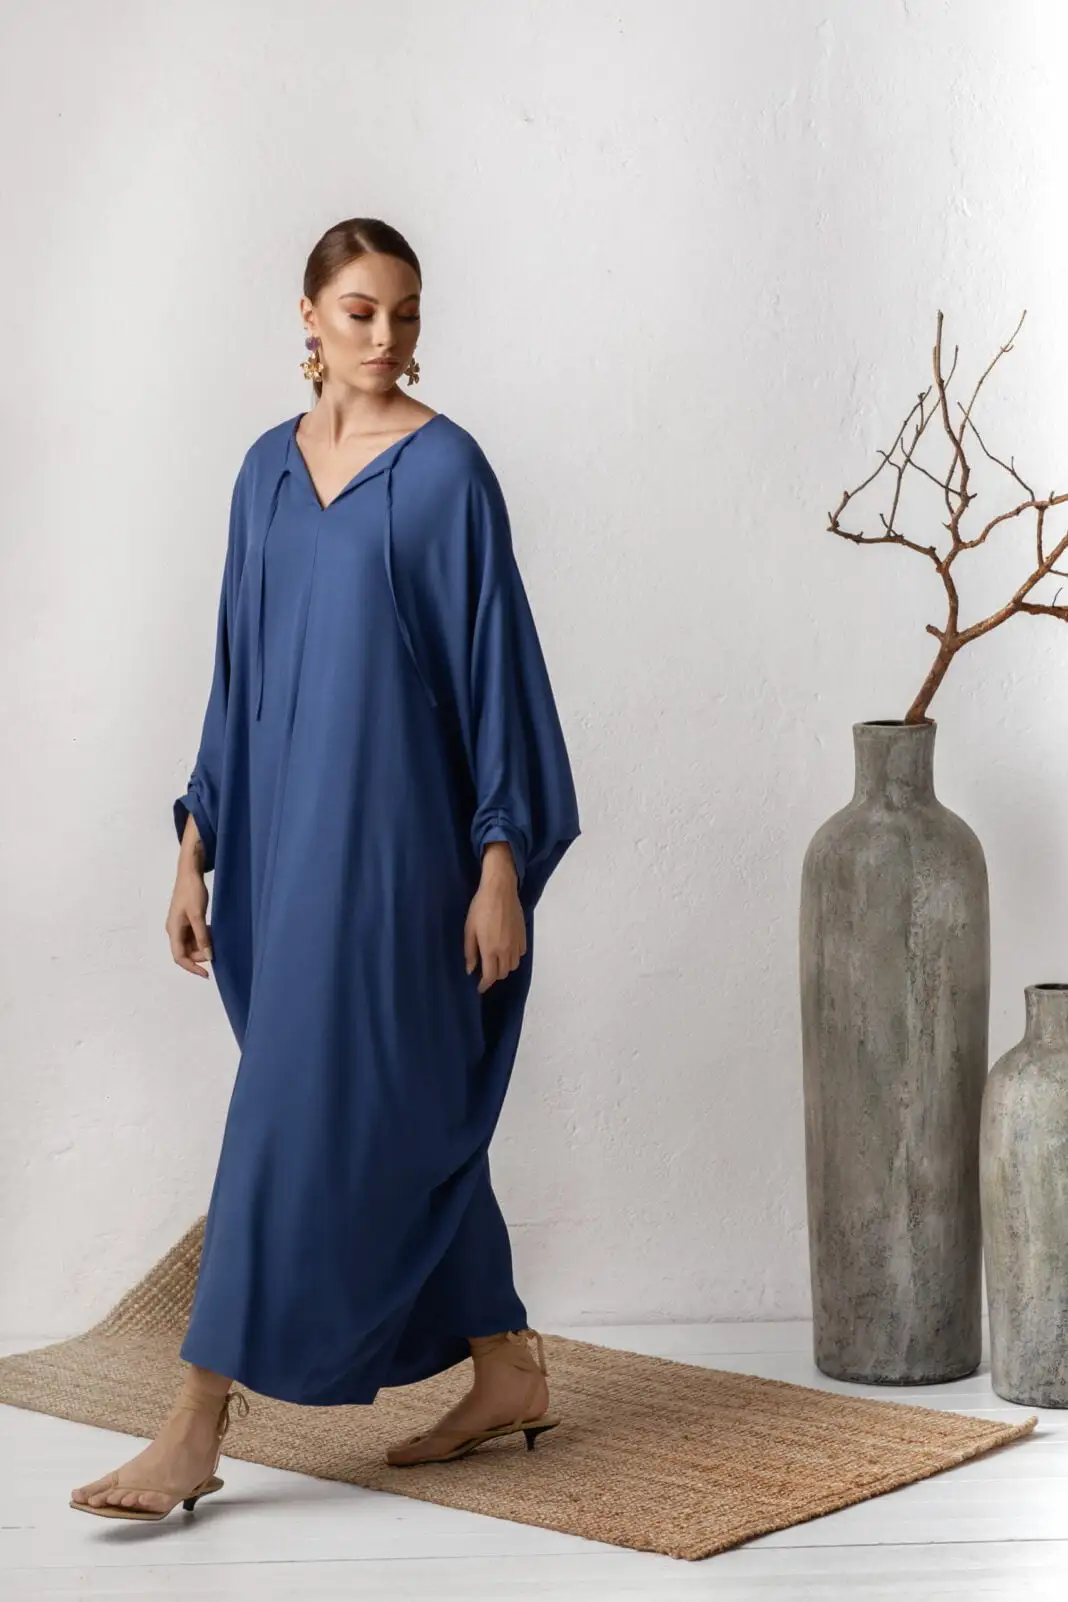 Blue kaftan house of azoiia dress for occasions, wedding guest minimal outfit, modest dress.